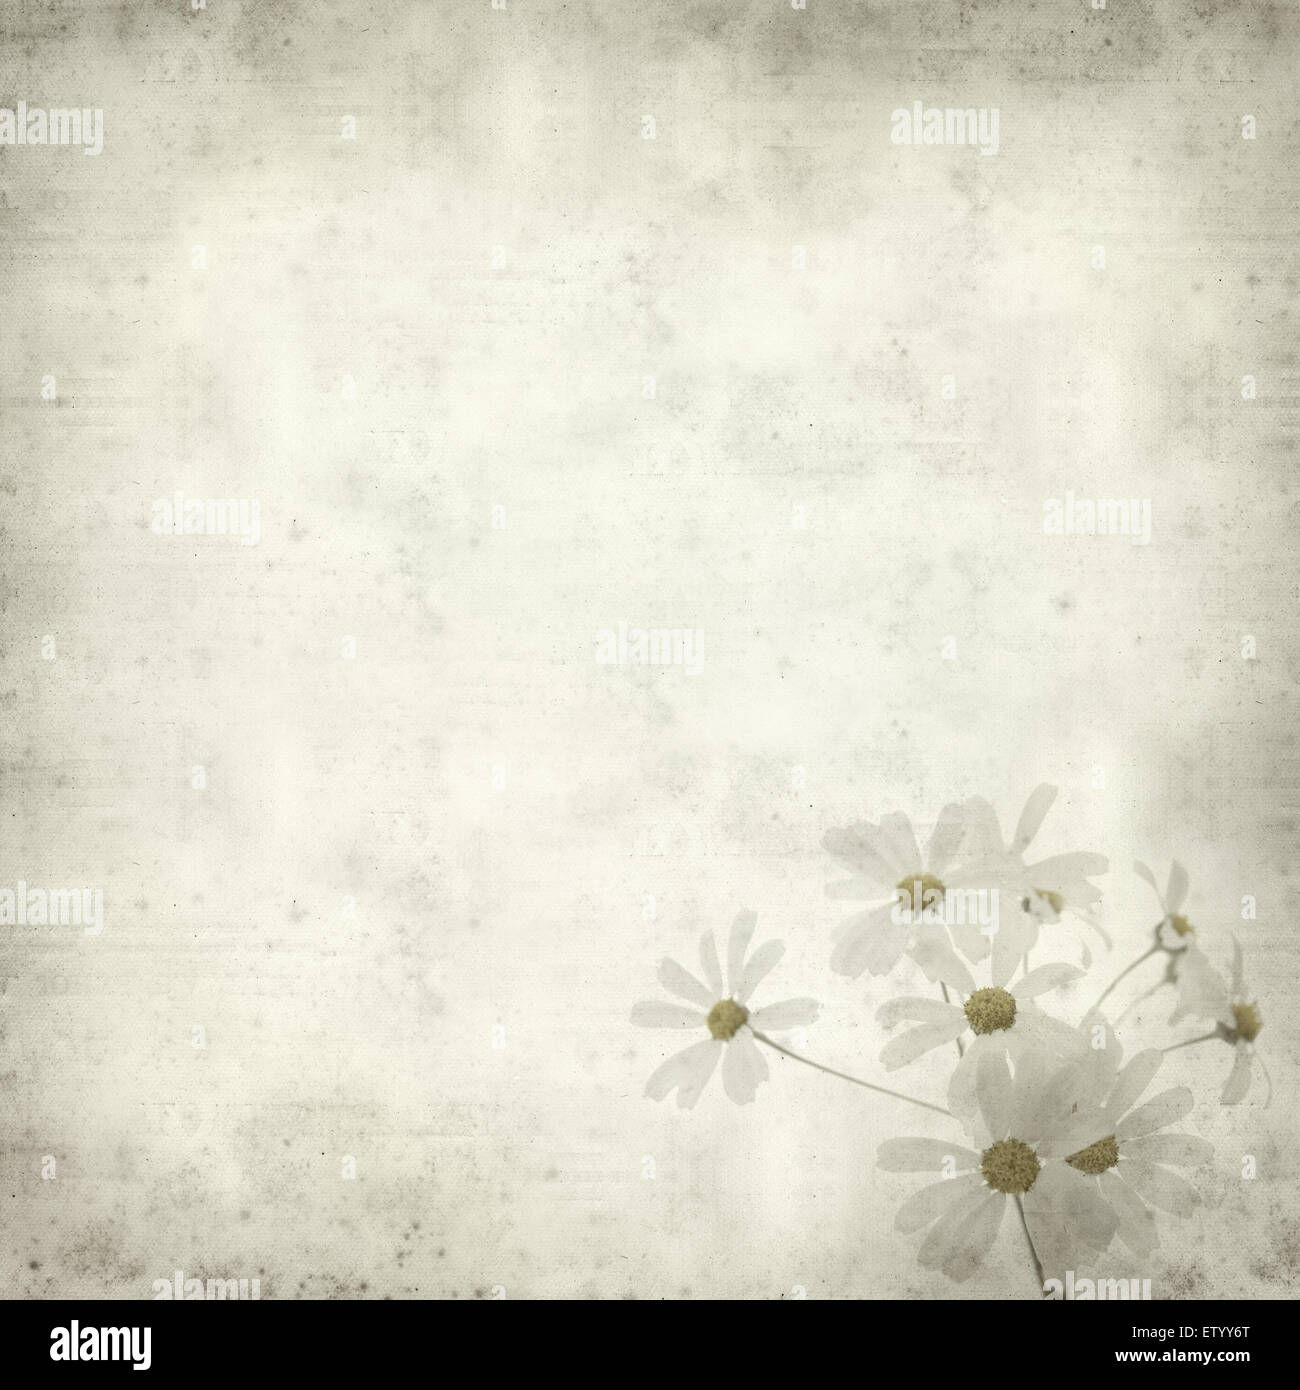 textured old paper background with Tanacetum ptarmiciflorum, Silver Lace Bush or Silver Tansy Stock Photo